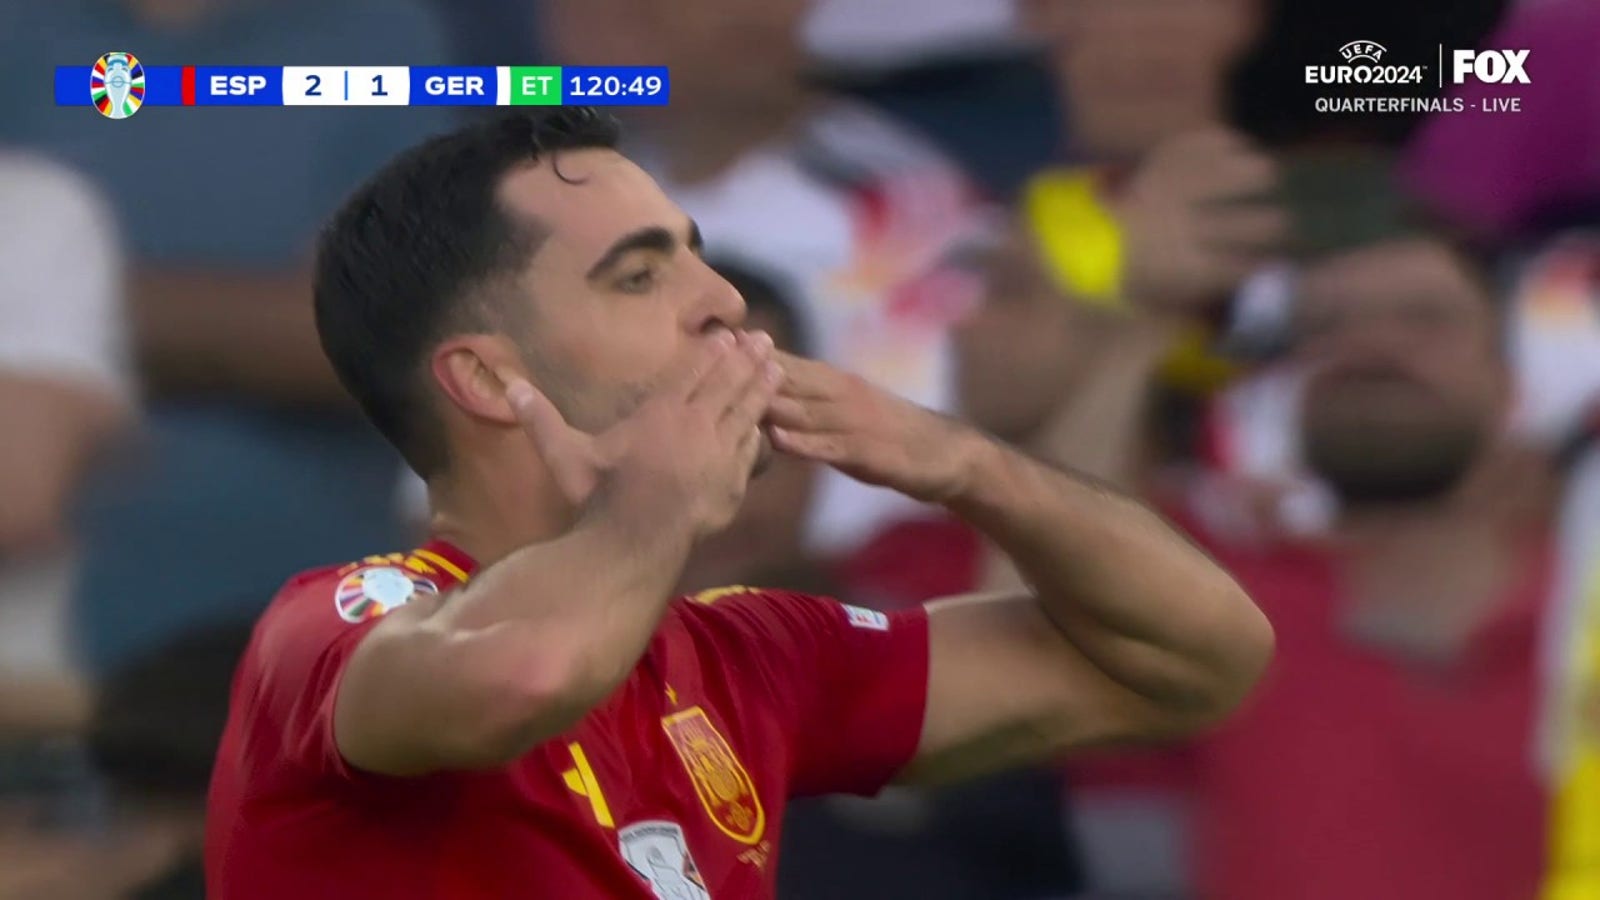 Mikel Merino scores in 119' of extra time to secure Spain's 2-1 victory over Germany | UEFA Euro 2024